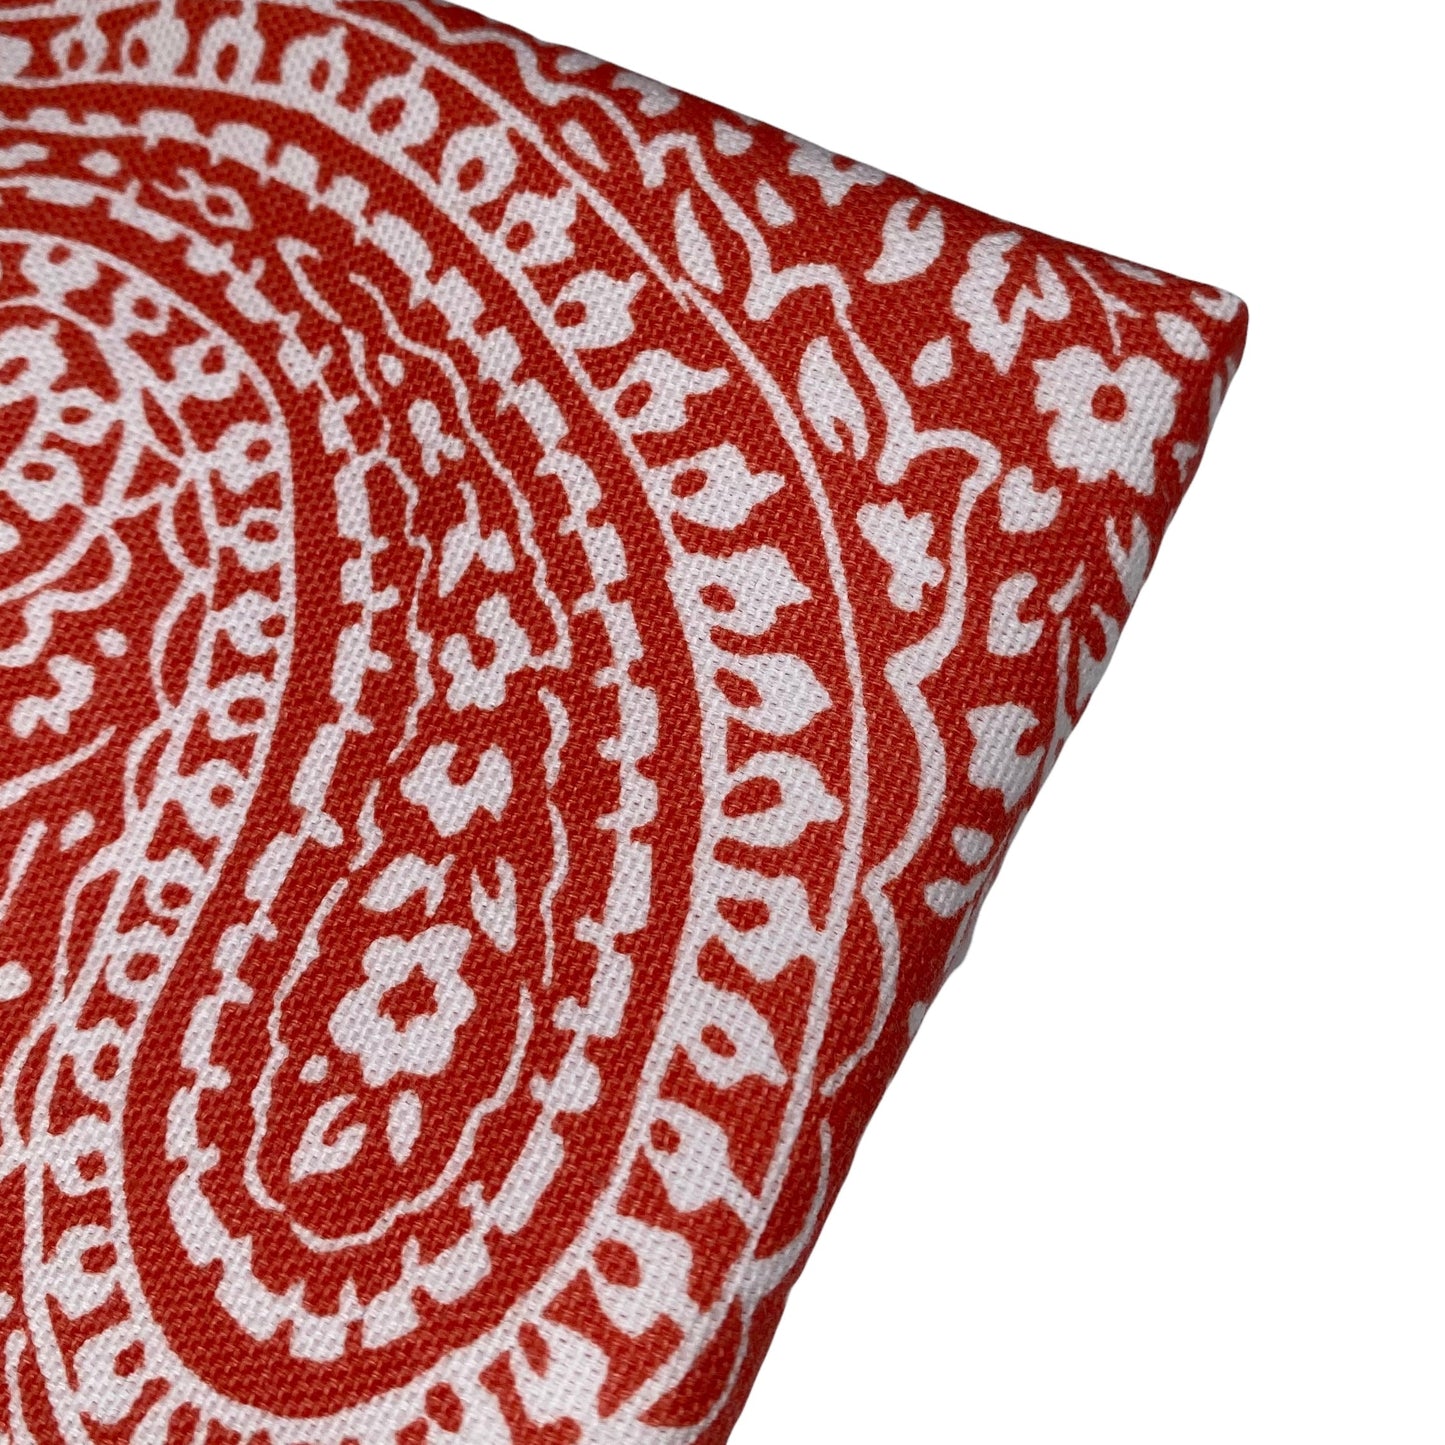 Printed Cotton Canvas Paisley - Coral/White